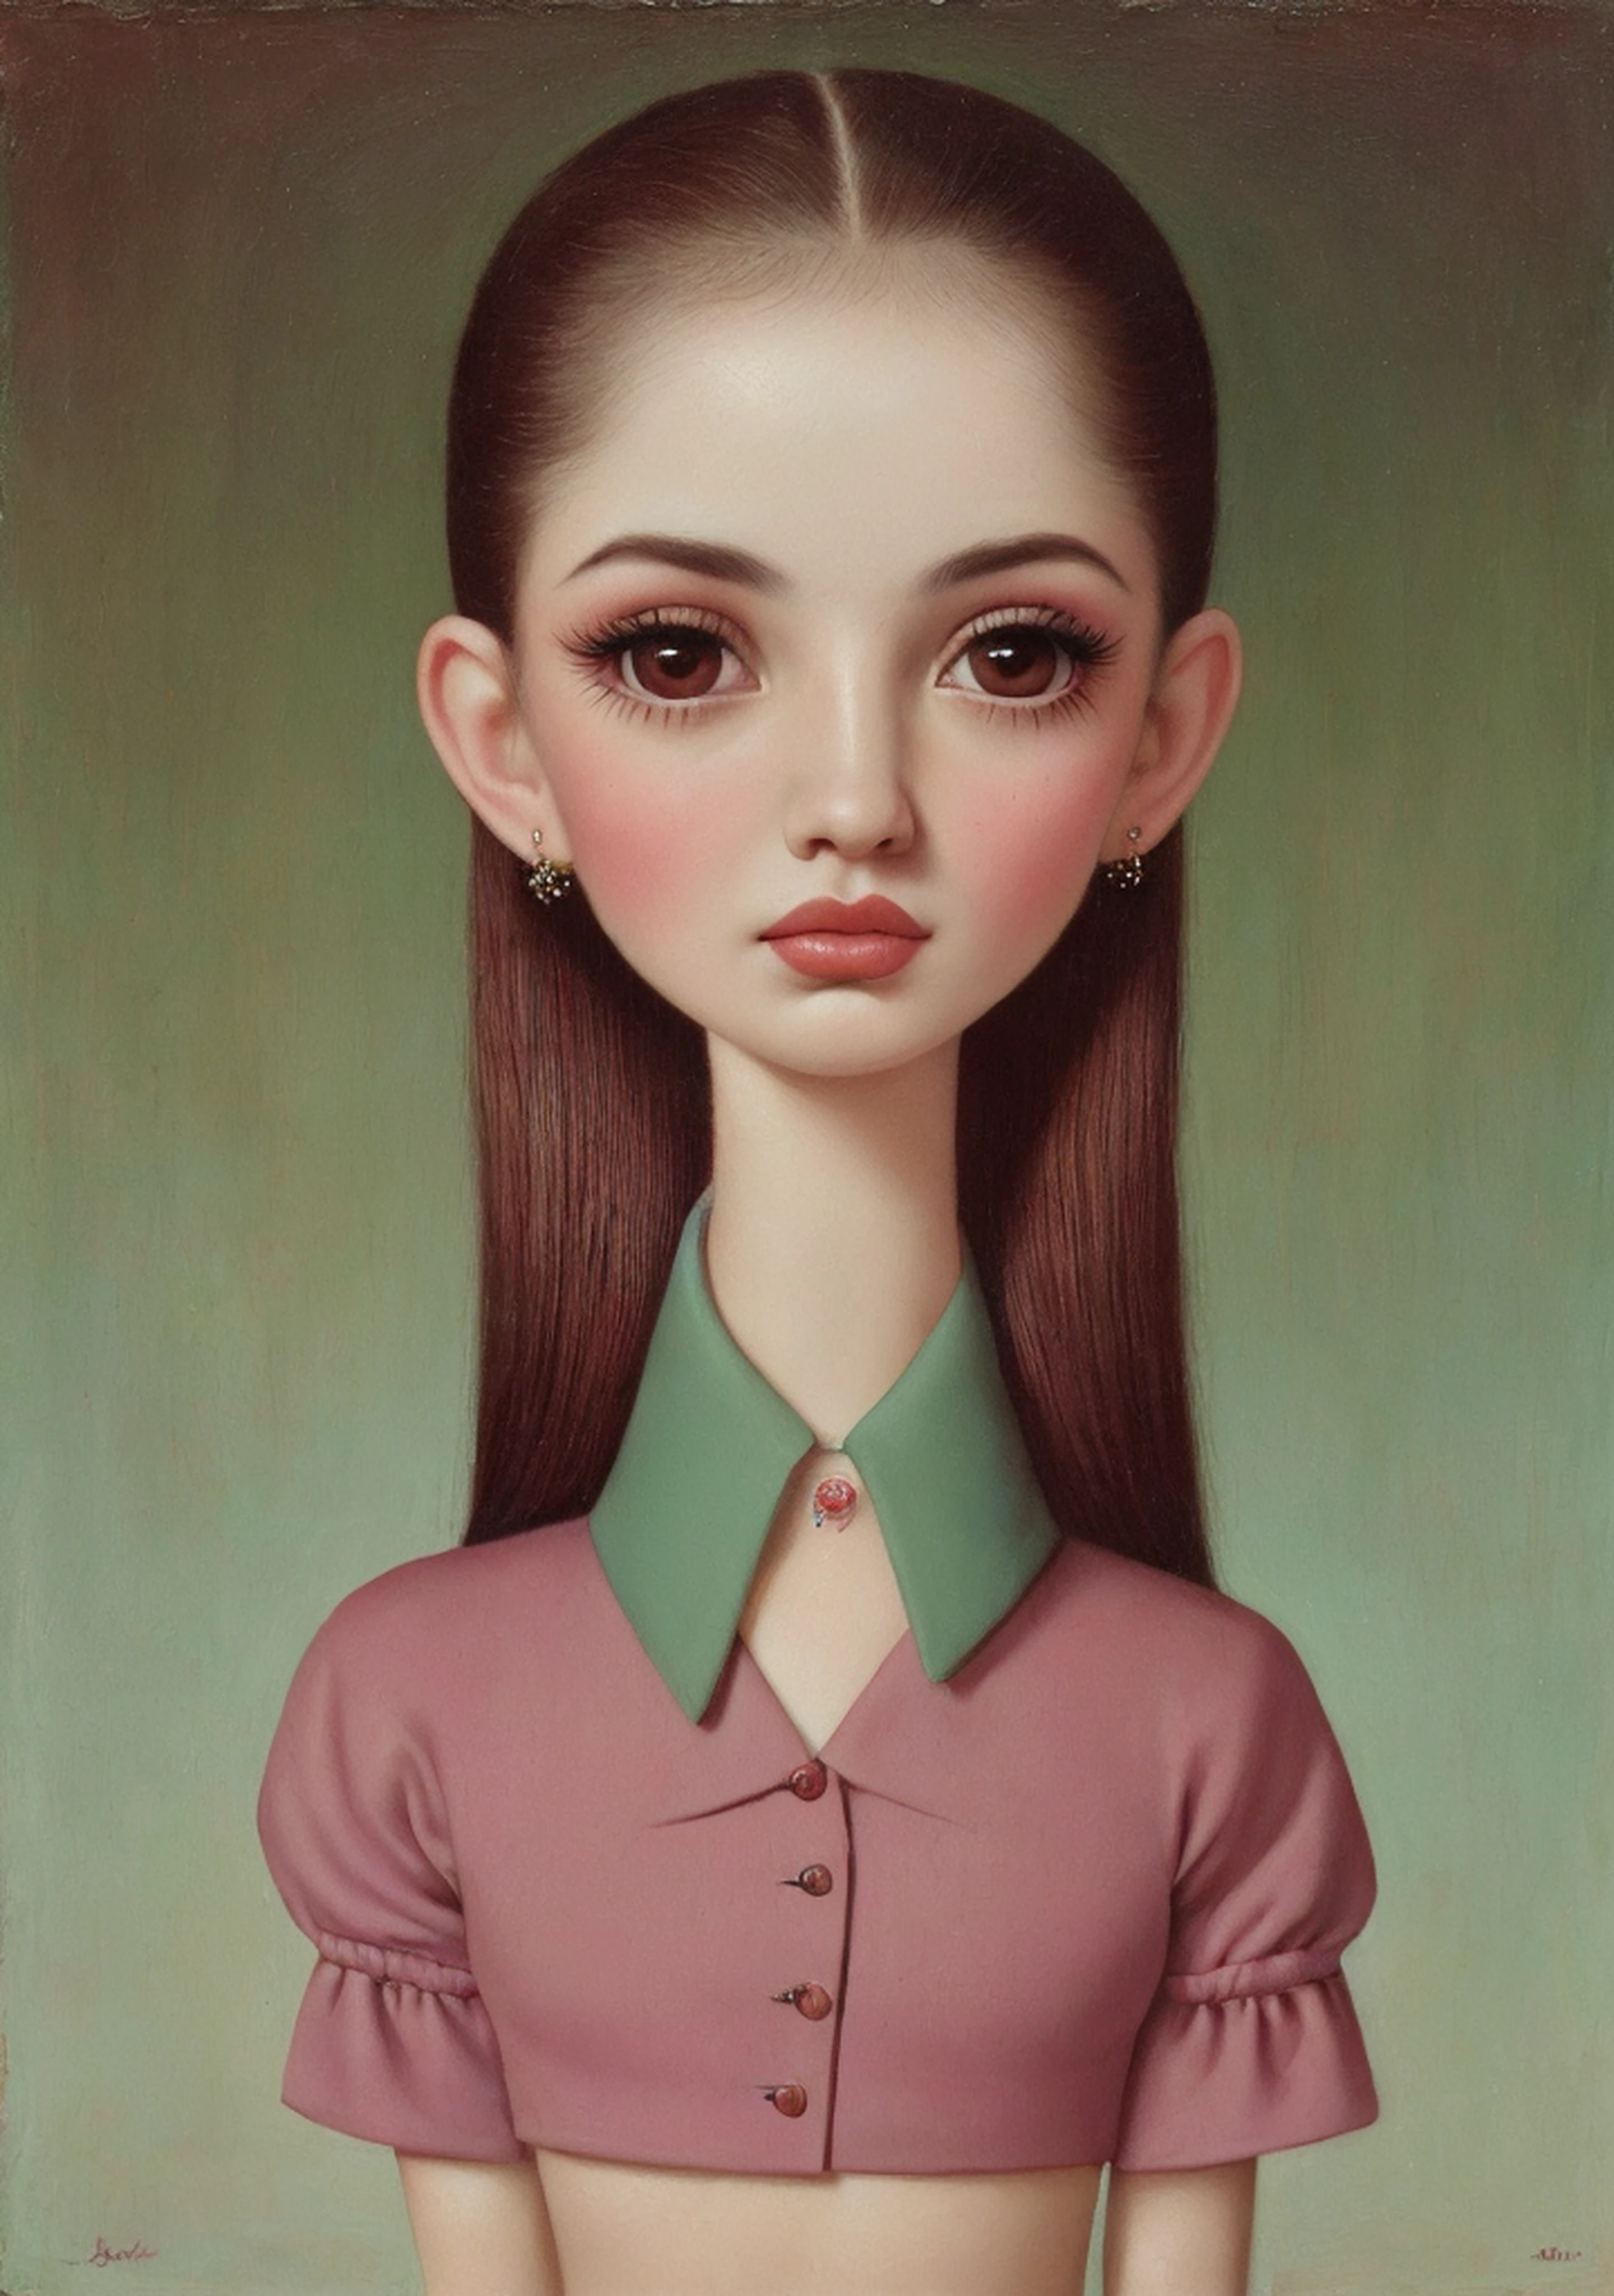 painting of an ugly woman with very thick and hairy eyebrows, Styled by Mark Ryden, naked